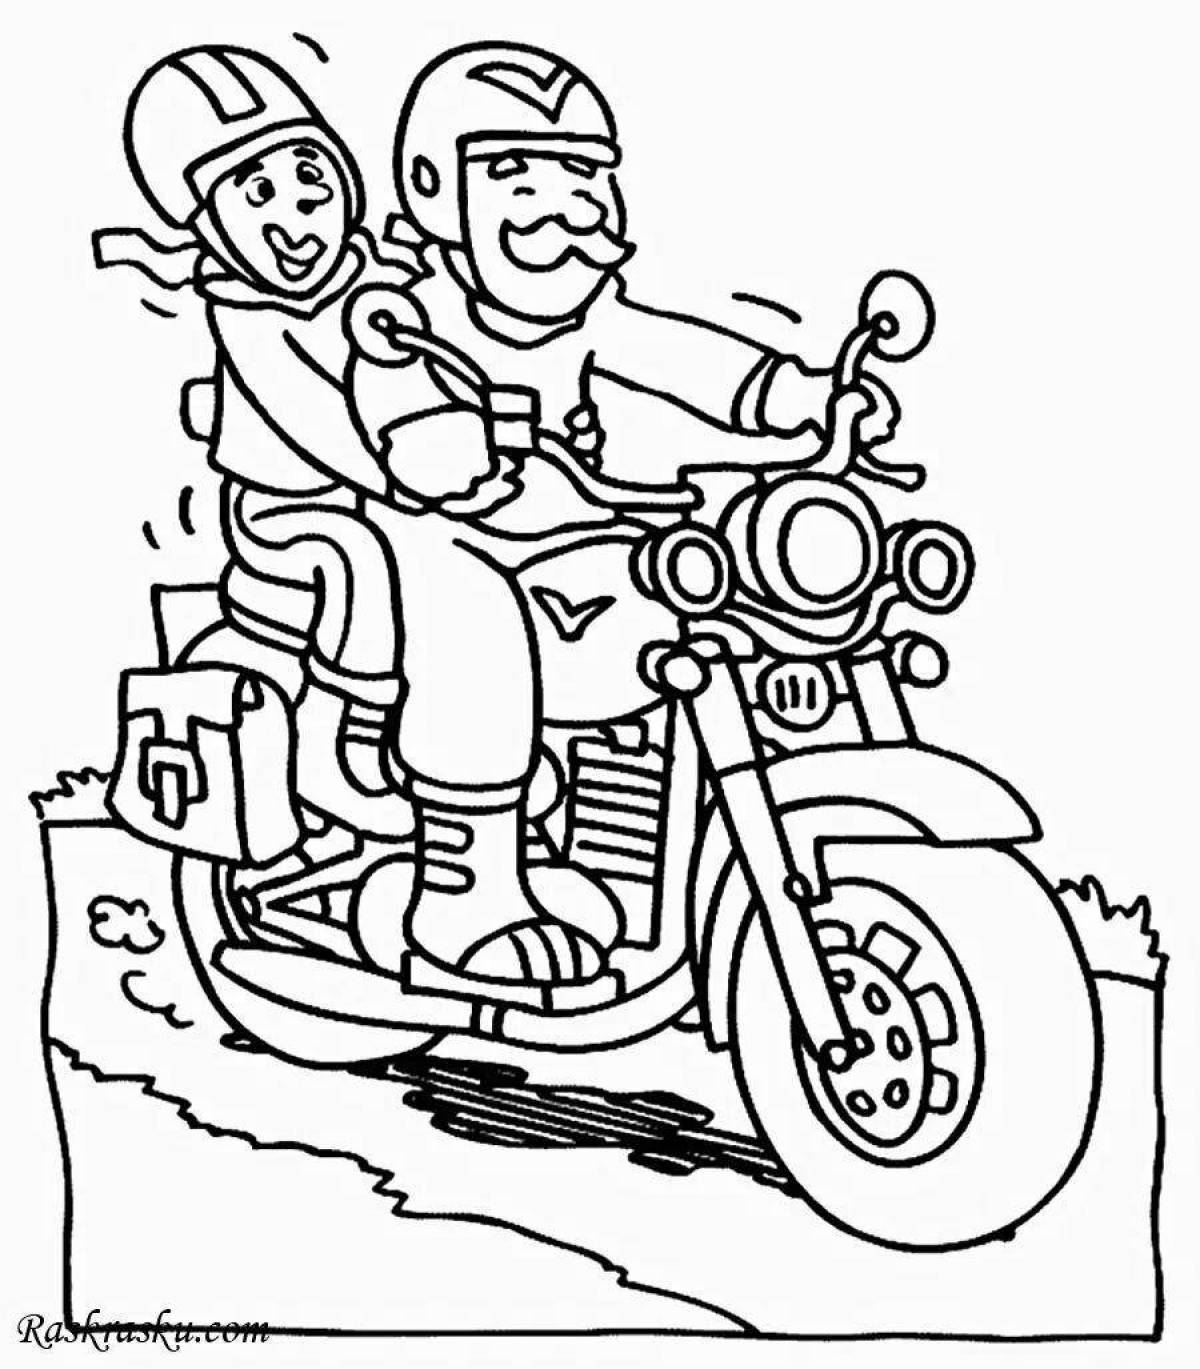 Luxury military motorcycle coloring page